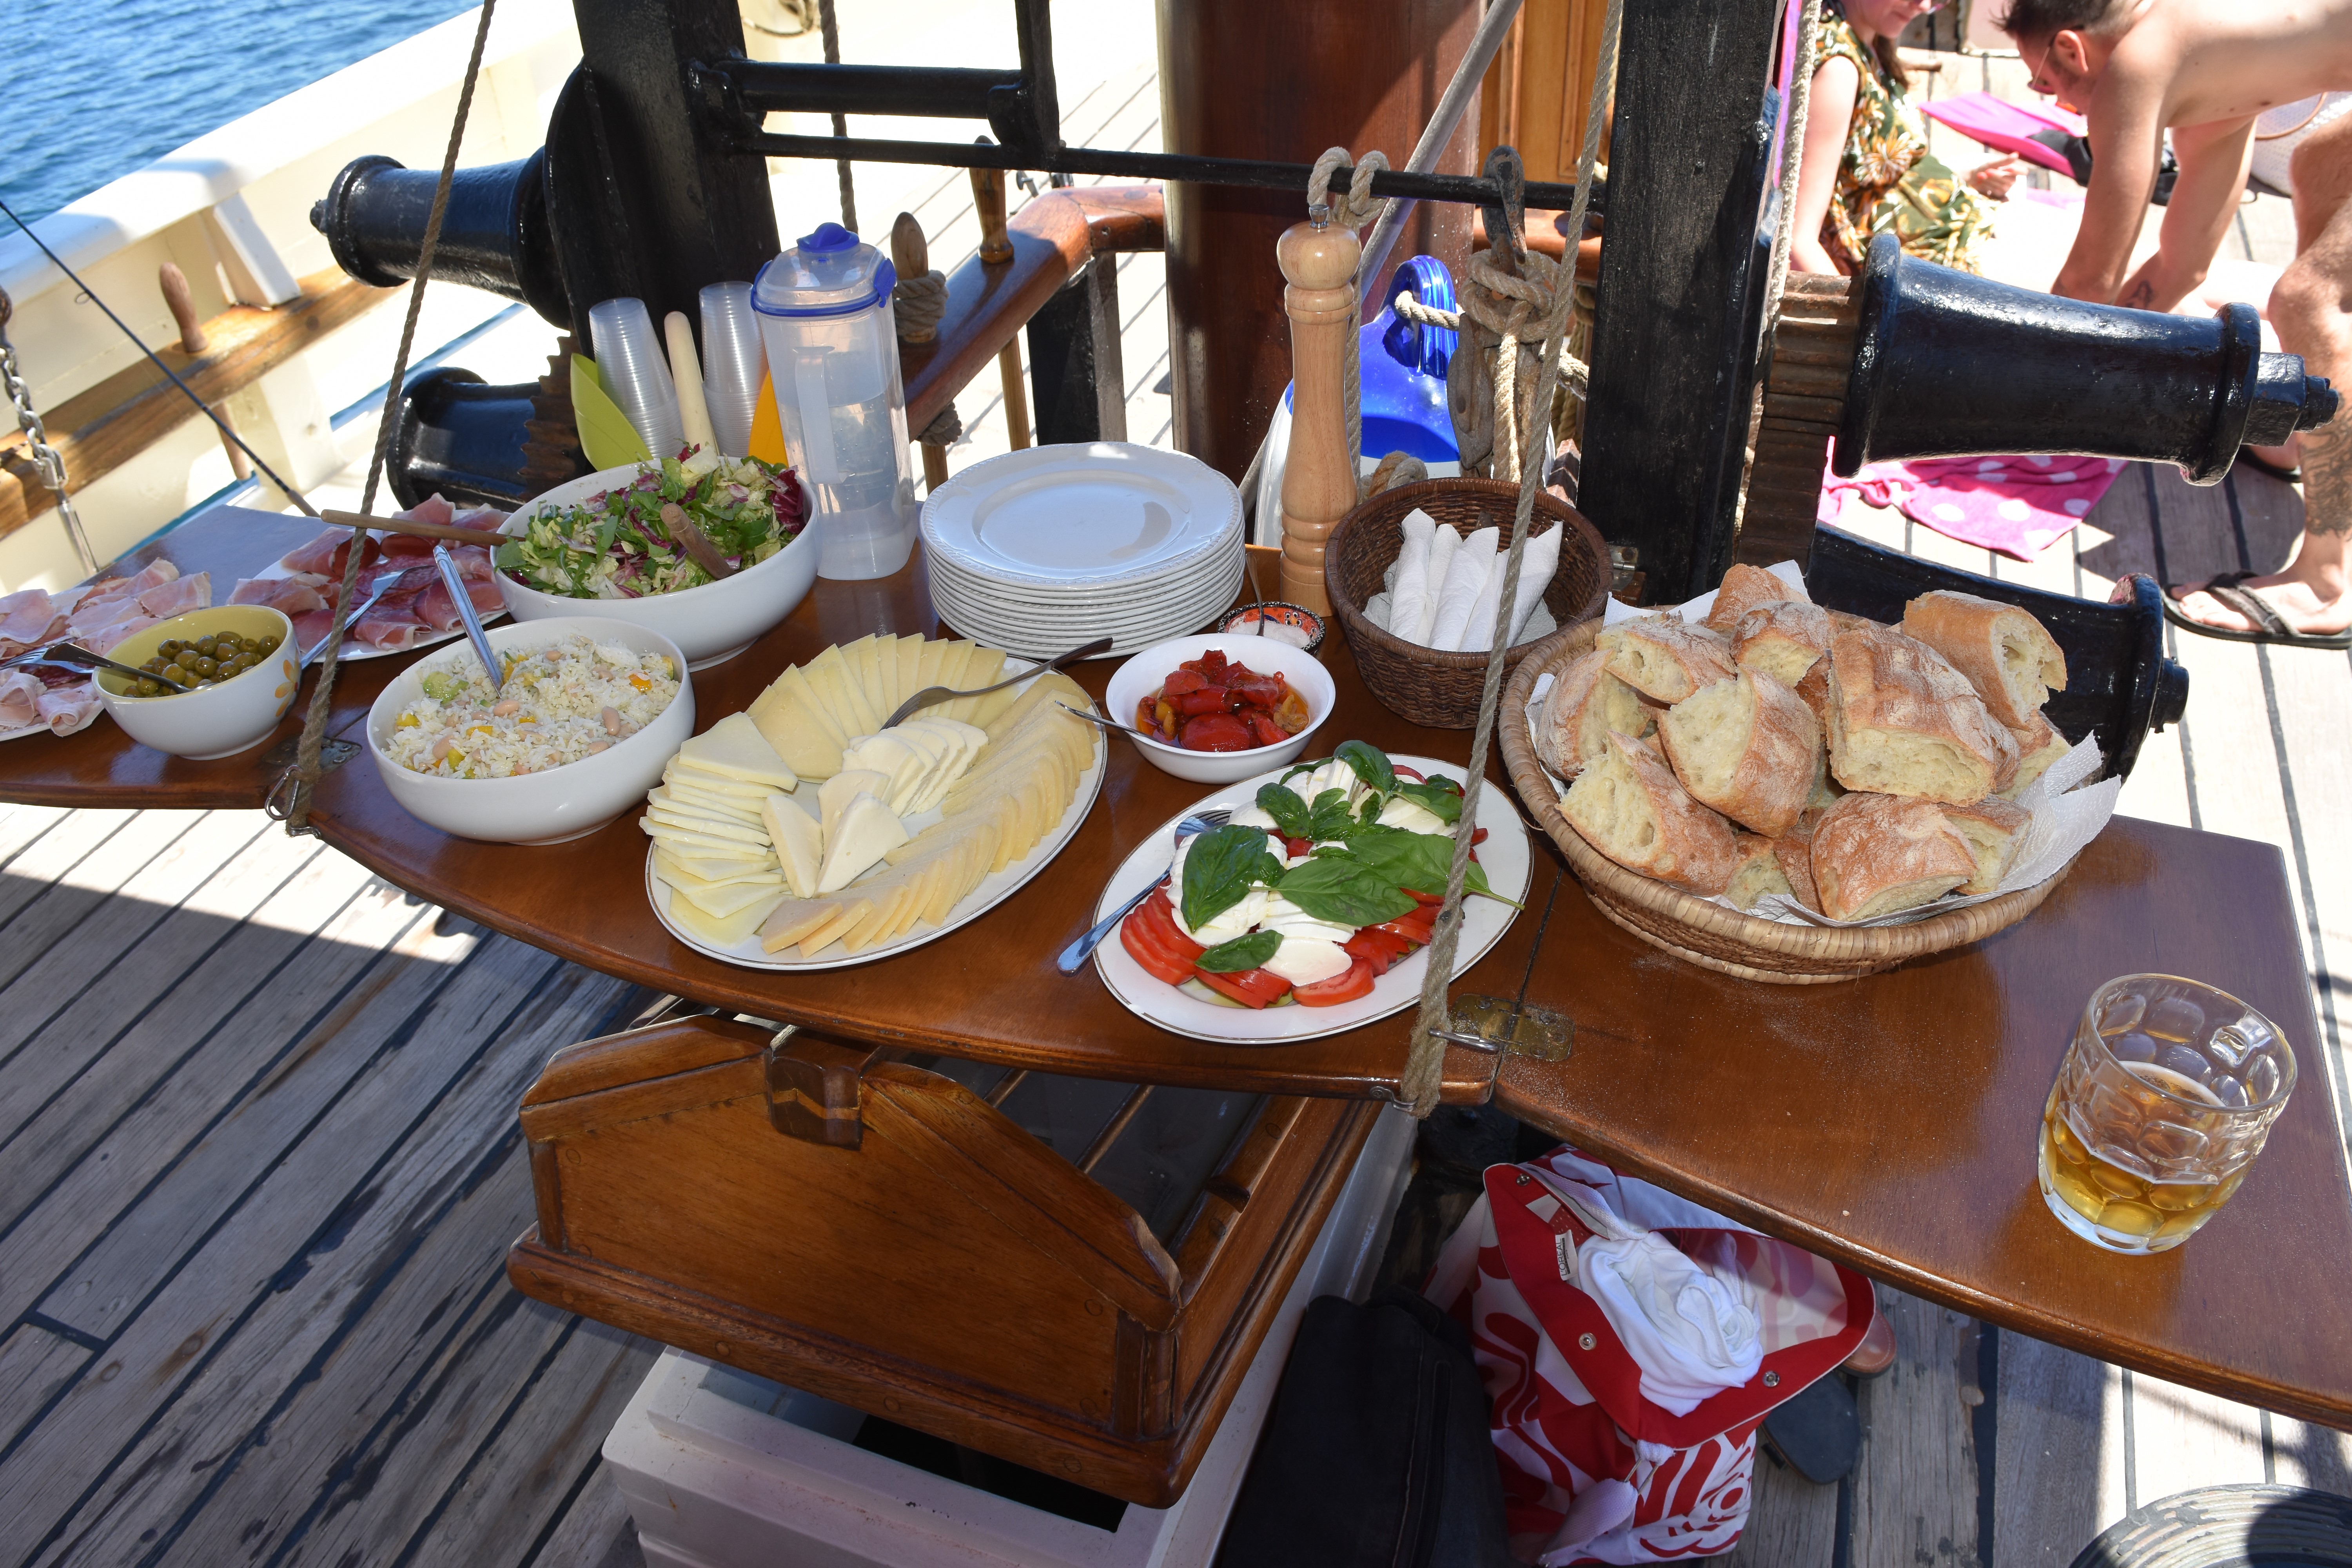 Typical lunch on board Andrea Jensen, local wines and beer inclusive